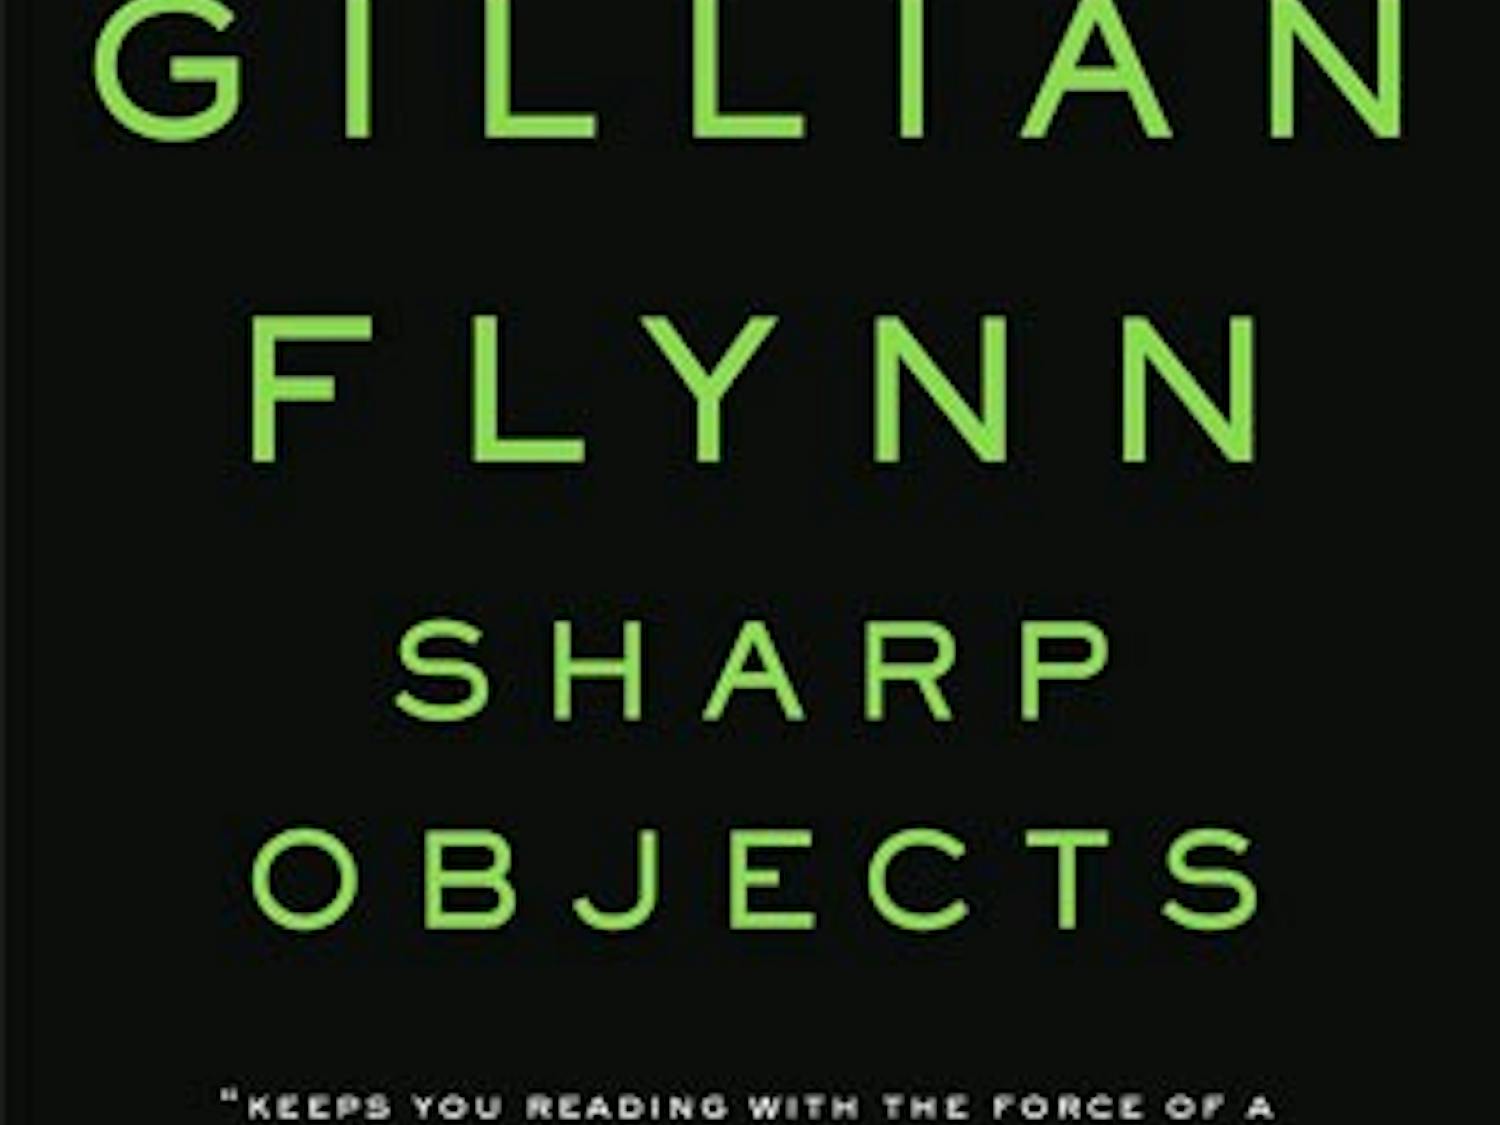 "Sharp Objects" by Gillian Flynn is the harrowing story of a crime journalist's struggle to unravel the murder of two preteen girls.